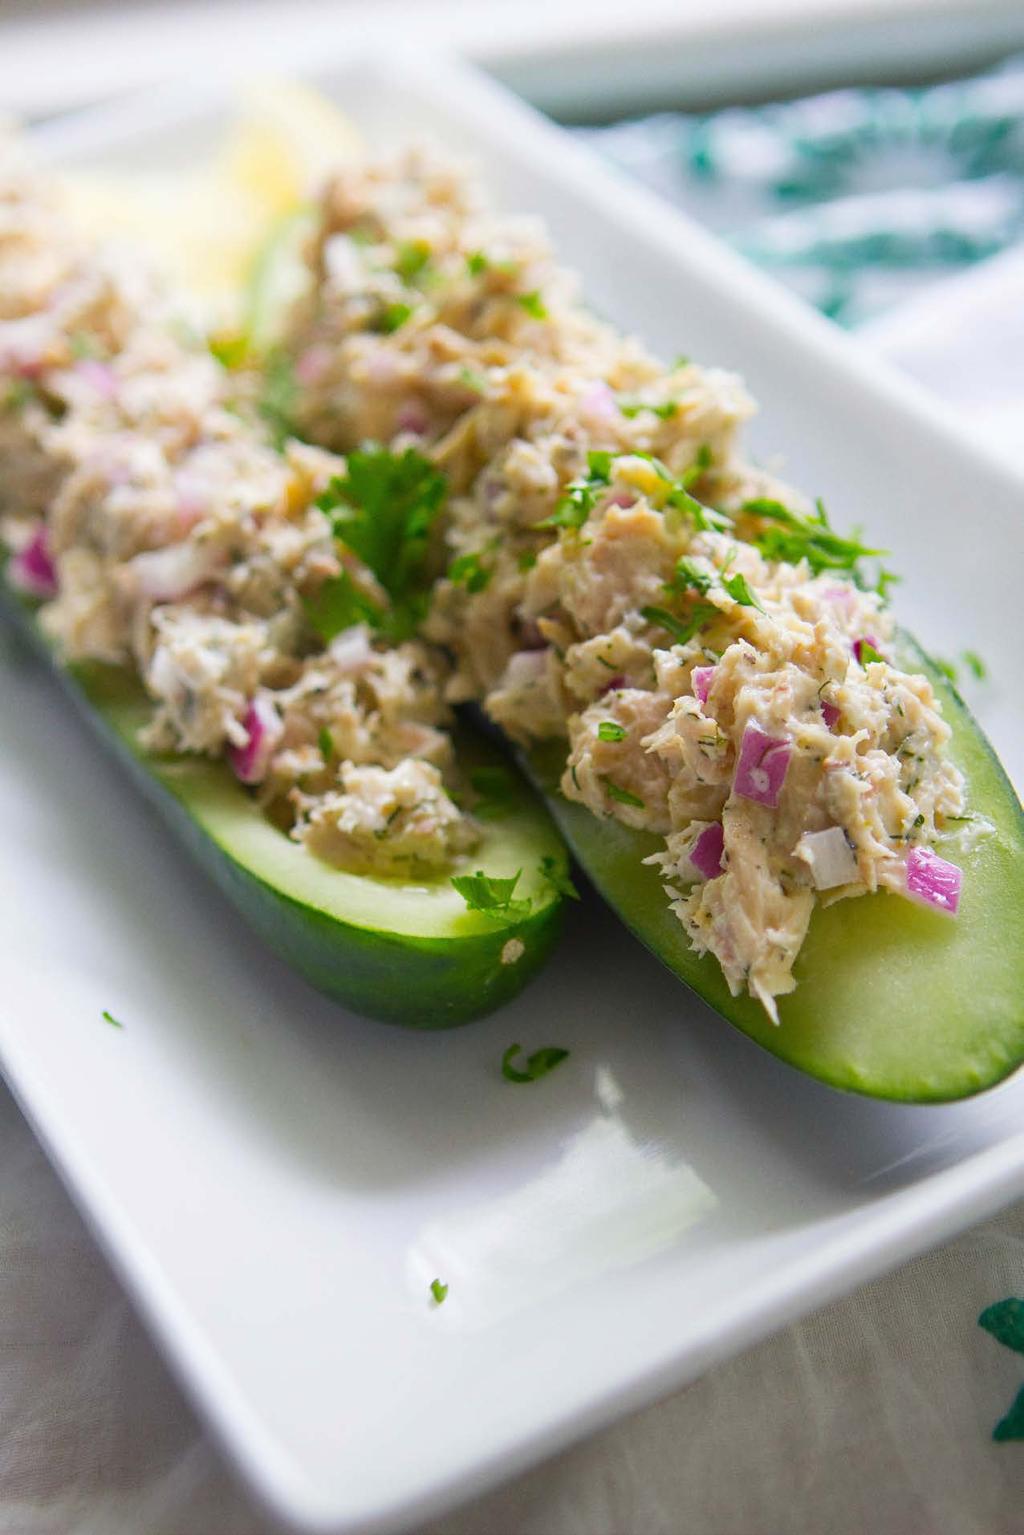 6. Tuna Salad Boats Quick, simple, and full of delicious flavor, cucumbers are sliced and seeded, then stuffed with tuna salad (or quinoa, if you prefer a vegetarian option).